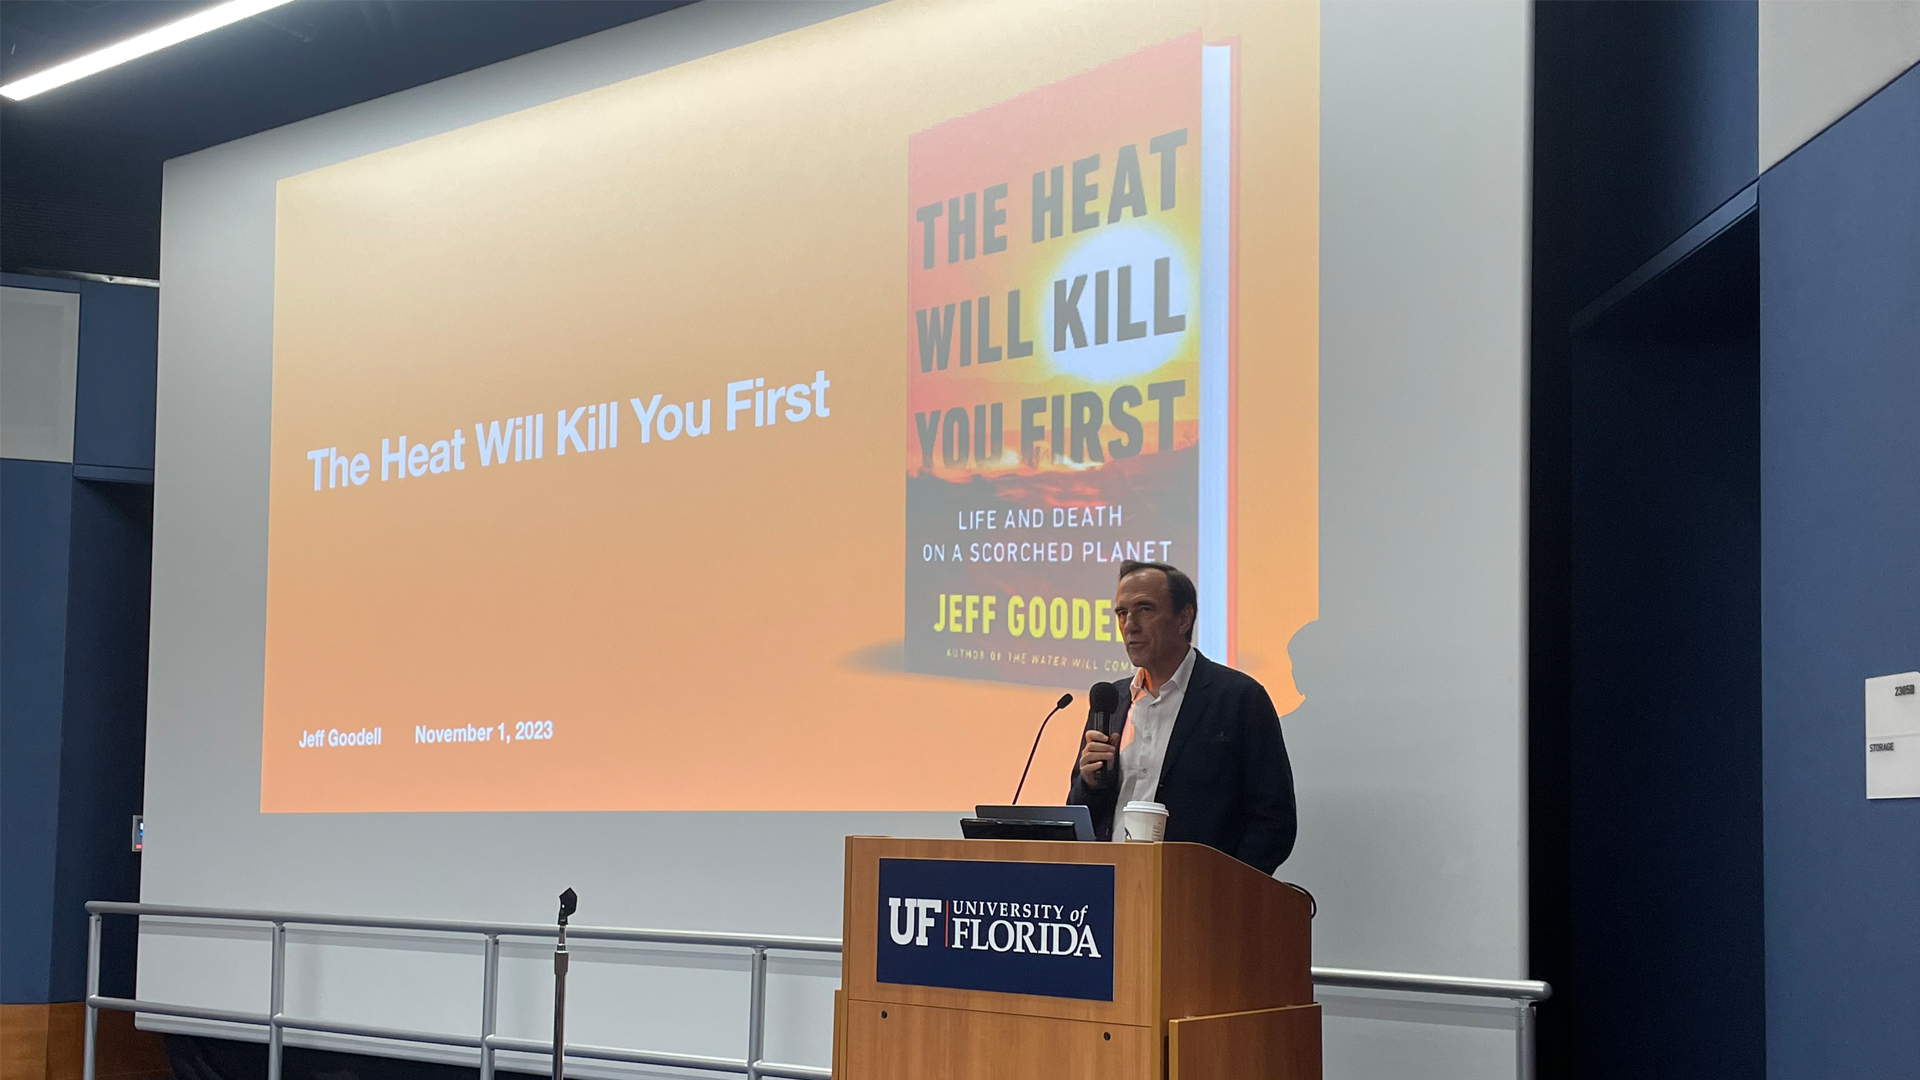 Read an Excerpt from Jeff Goodell's book The Heat Will Kill You First